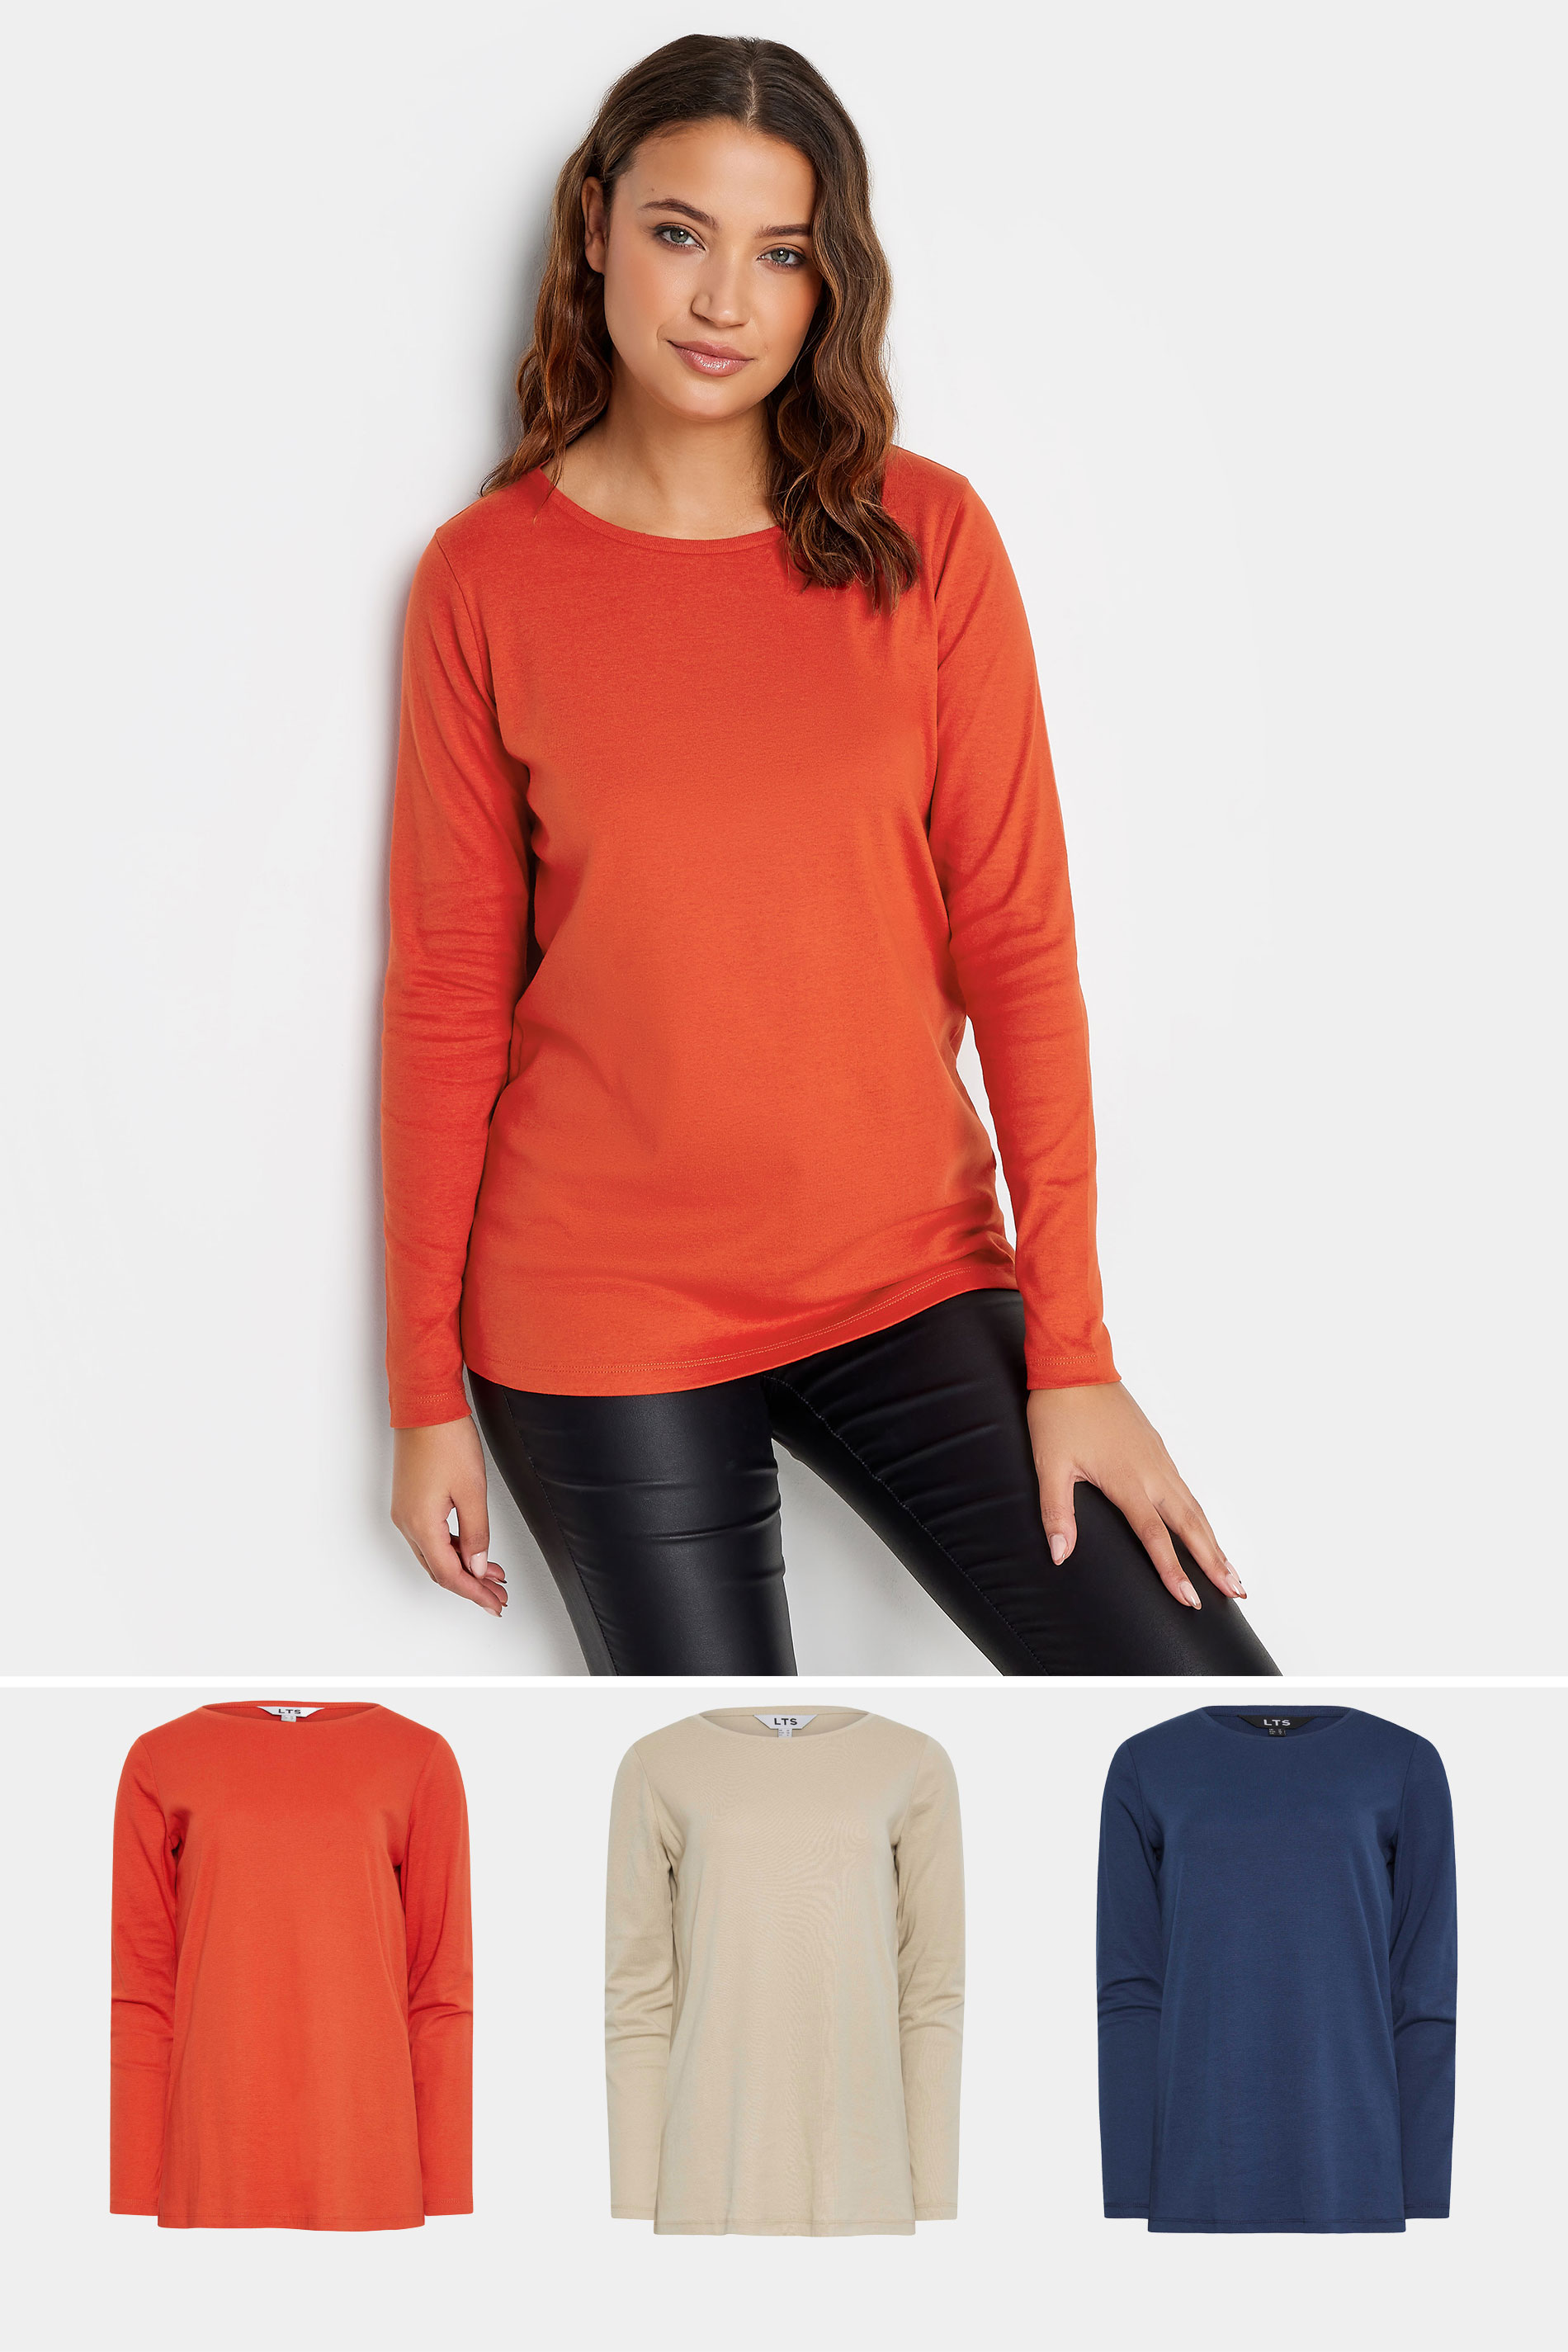 LTS Tall Womens 3 PACK Orange & Blue Scoop Neck Cotton T-Shirts | Long Tall Sally  1